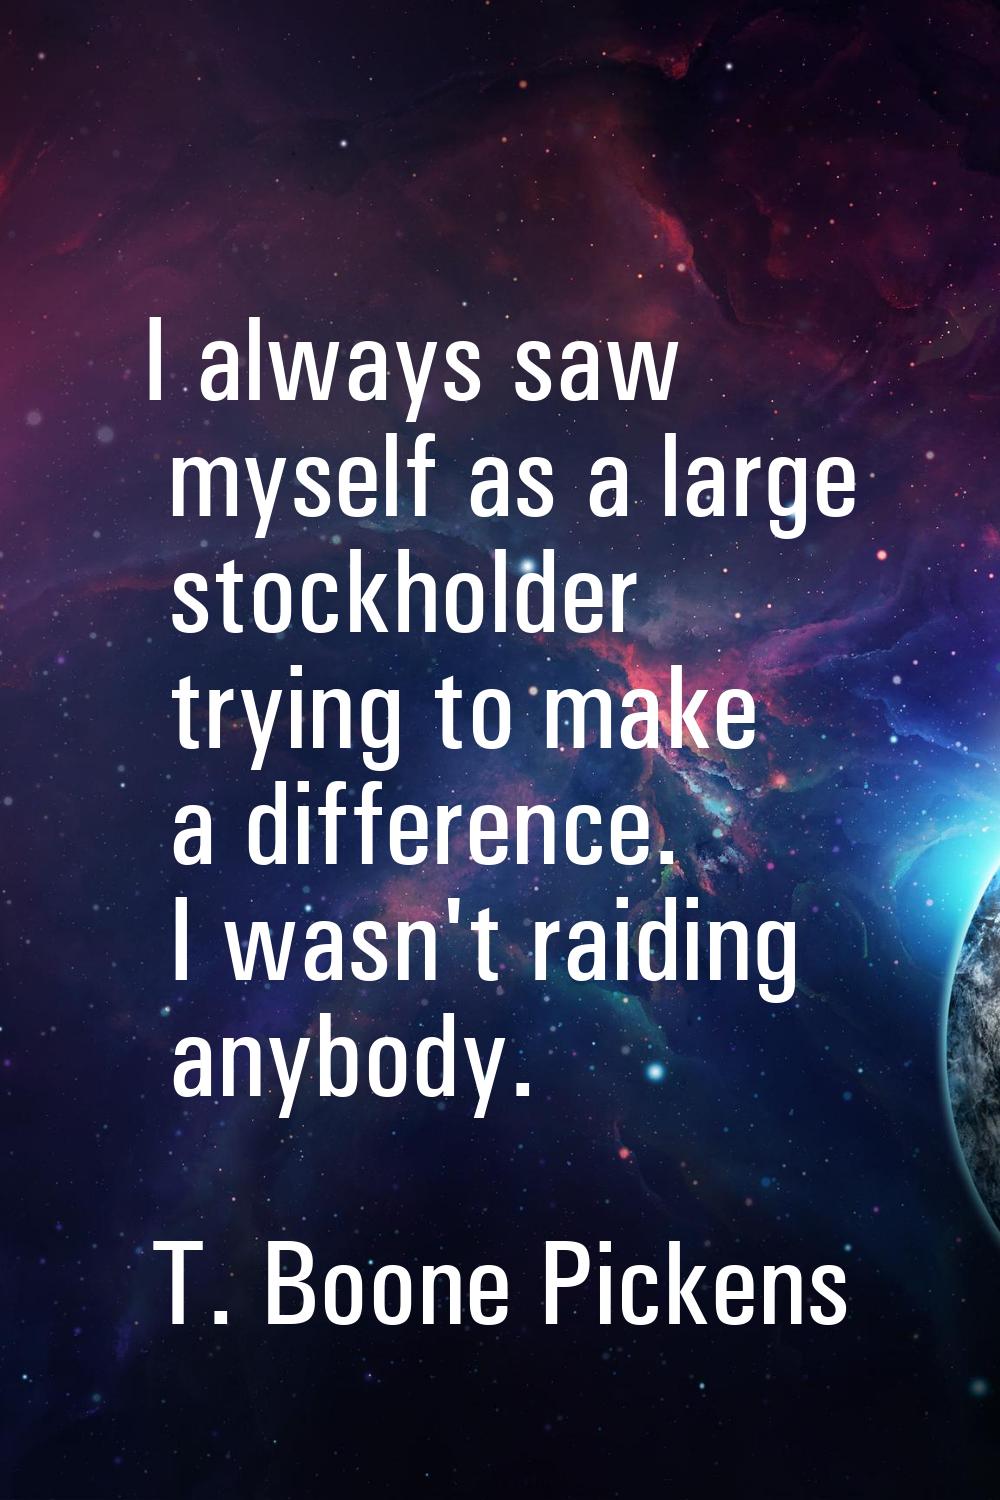 I always saw myself as a large stockholder trying to make a difference. I wasn't raiding anybody.